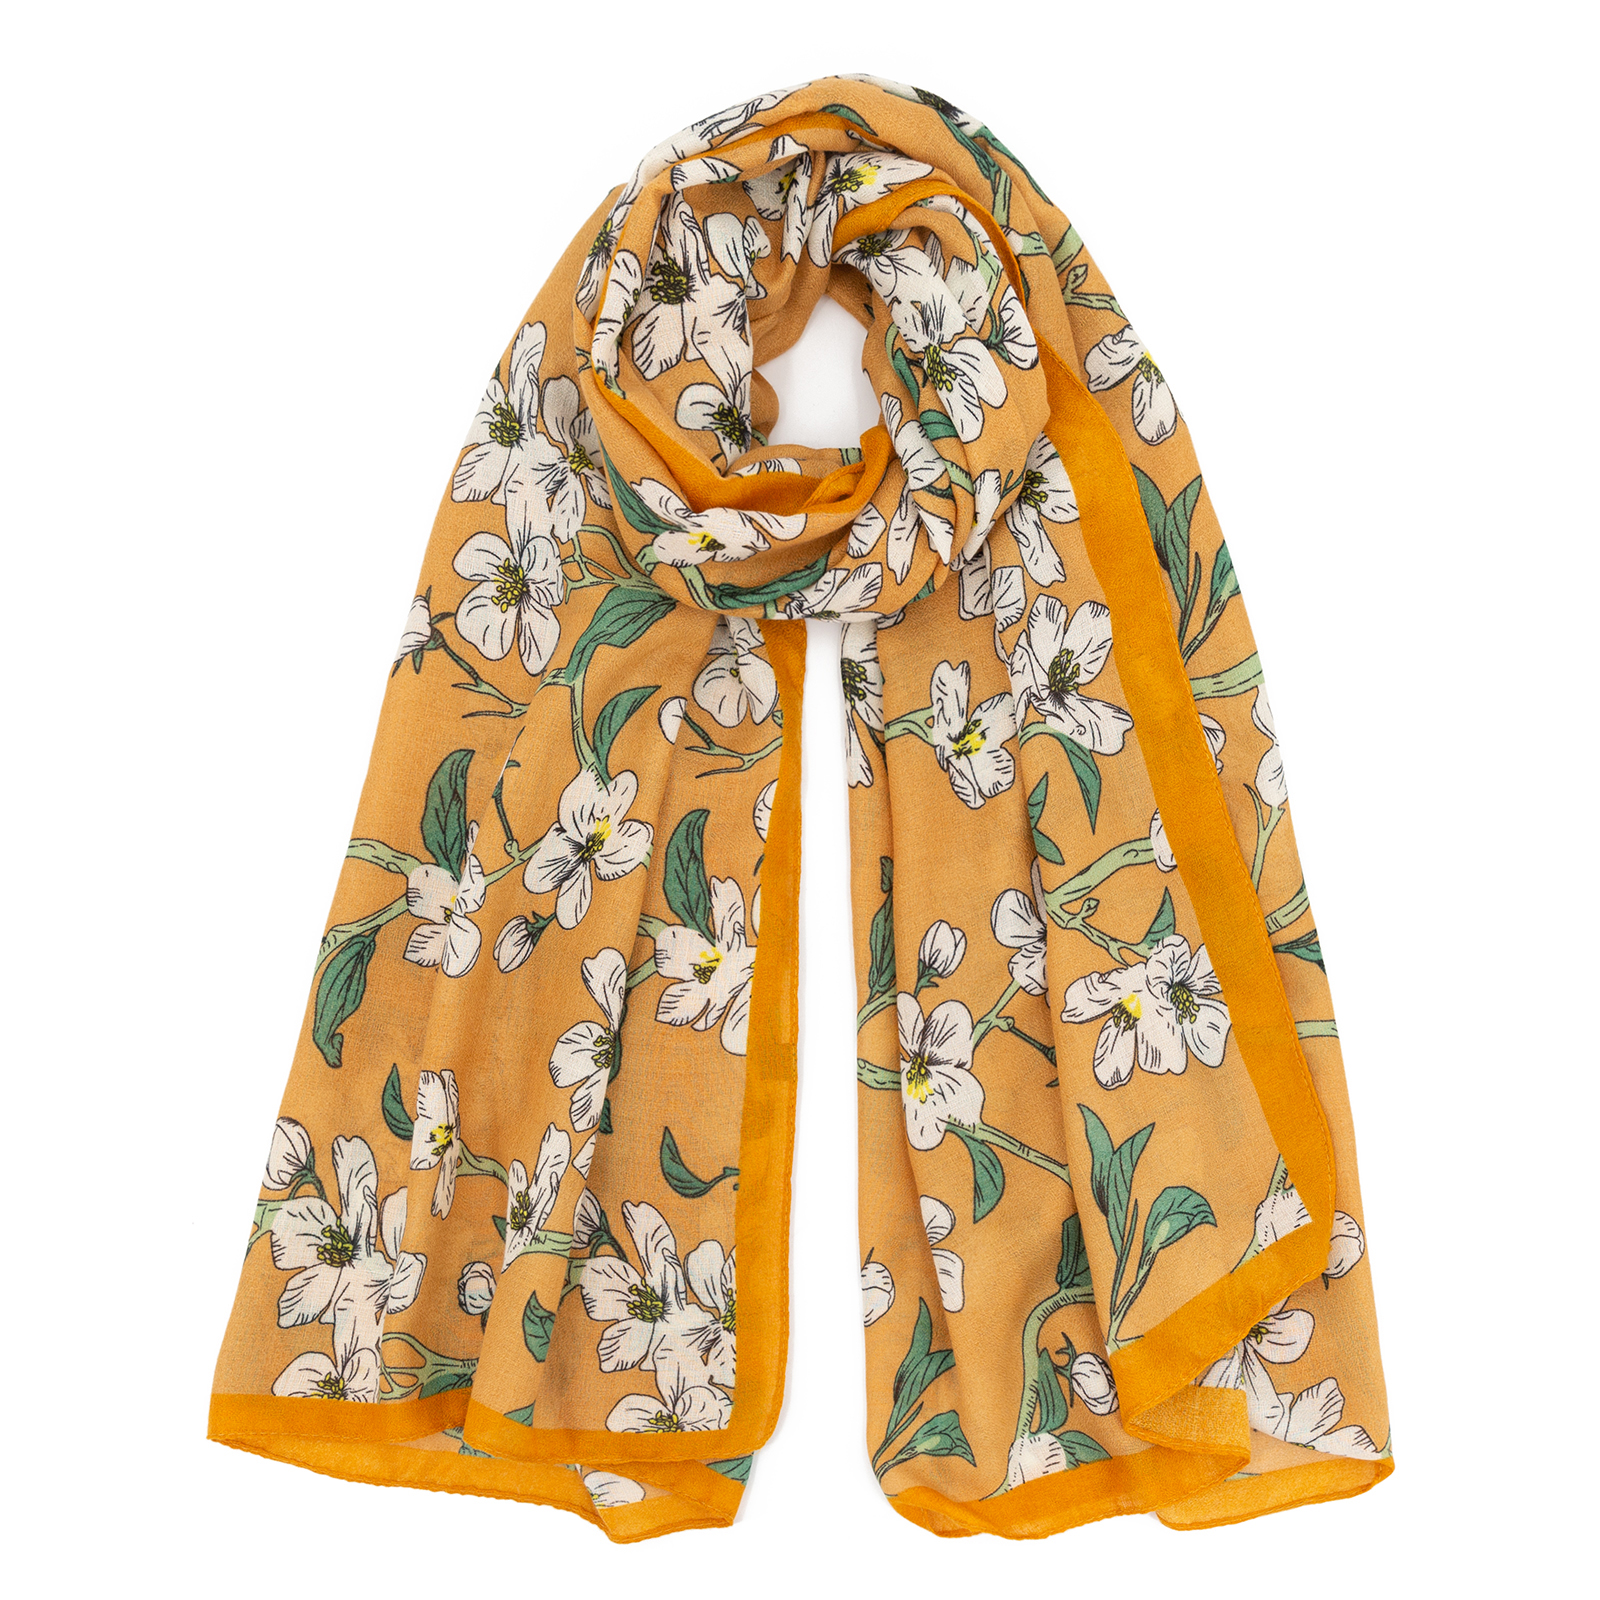 Wholesale Super Soft Yellow Floral Lightweight Shawls and Wrap Scarves